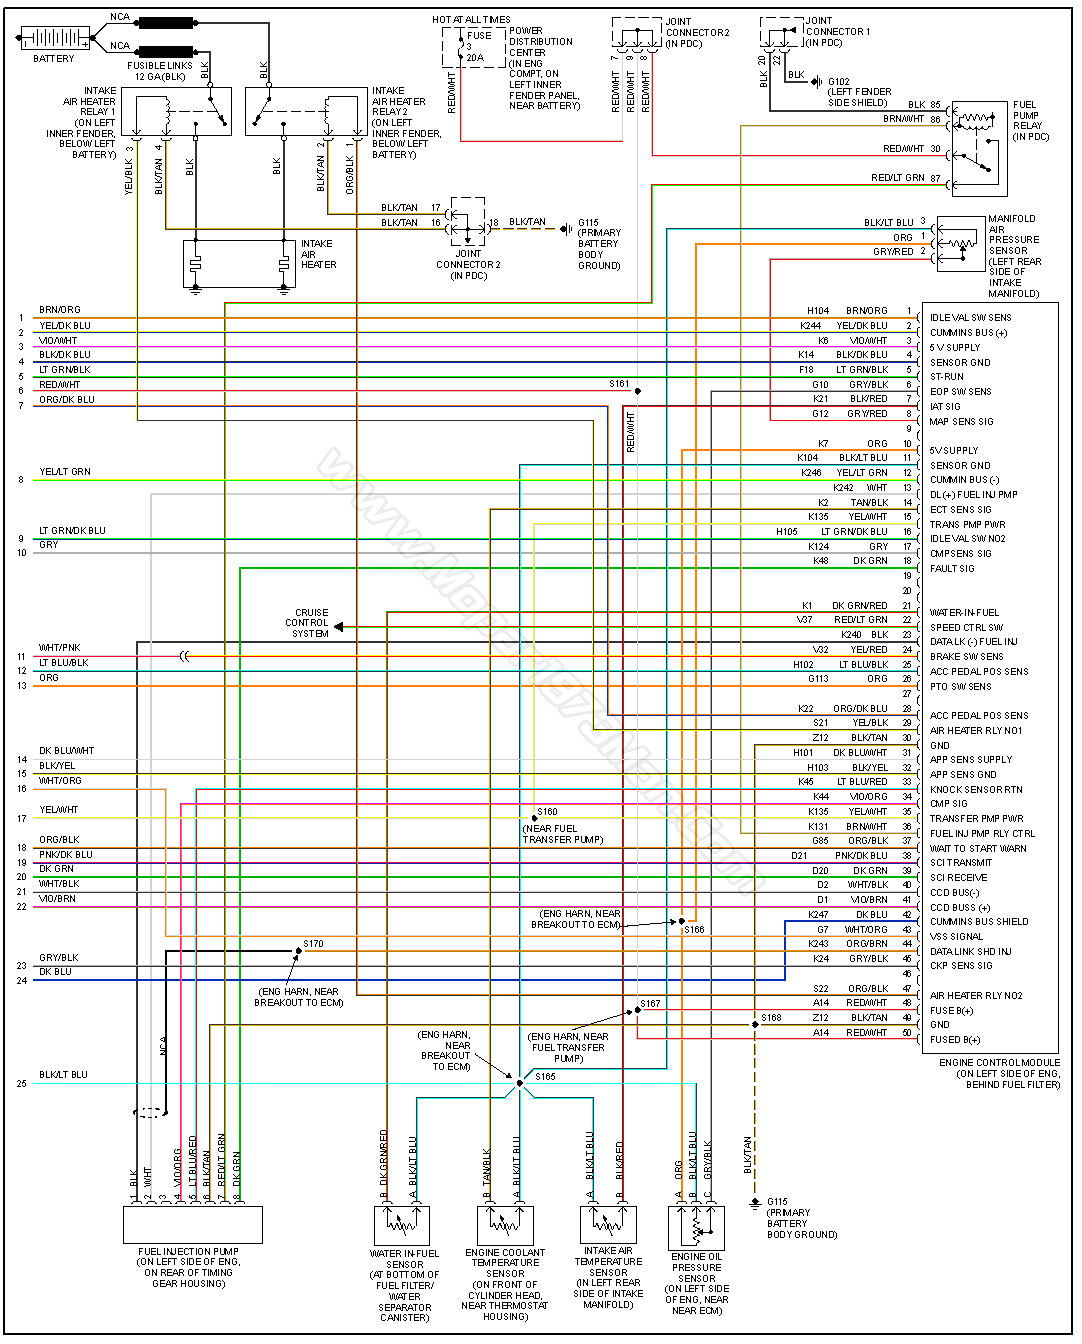 2009 Dodge Ram Radio Wiring Diagram Collection Wiring Collection